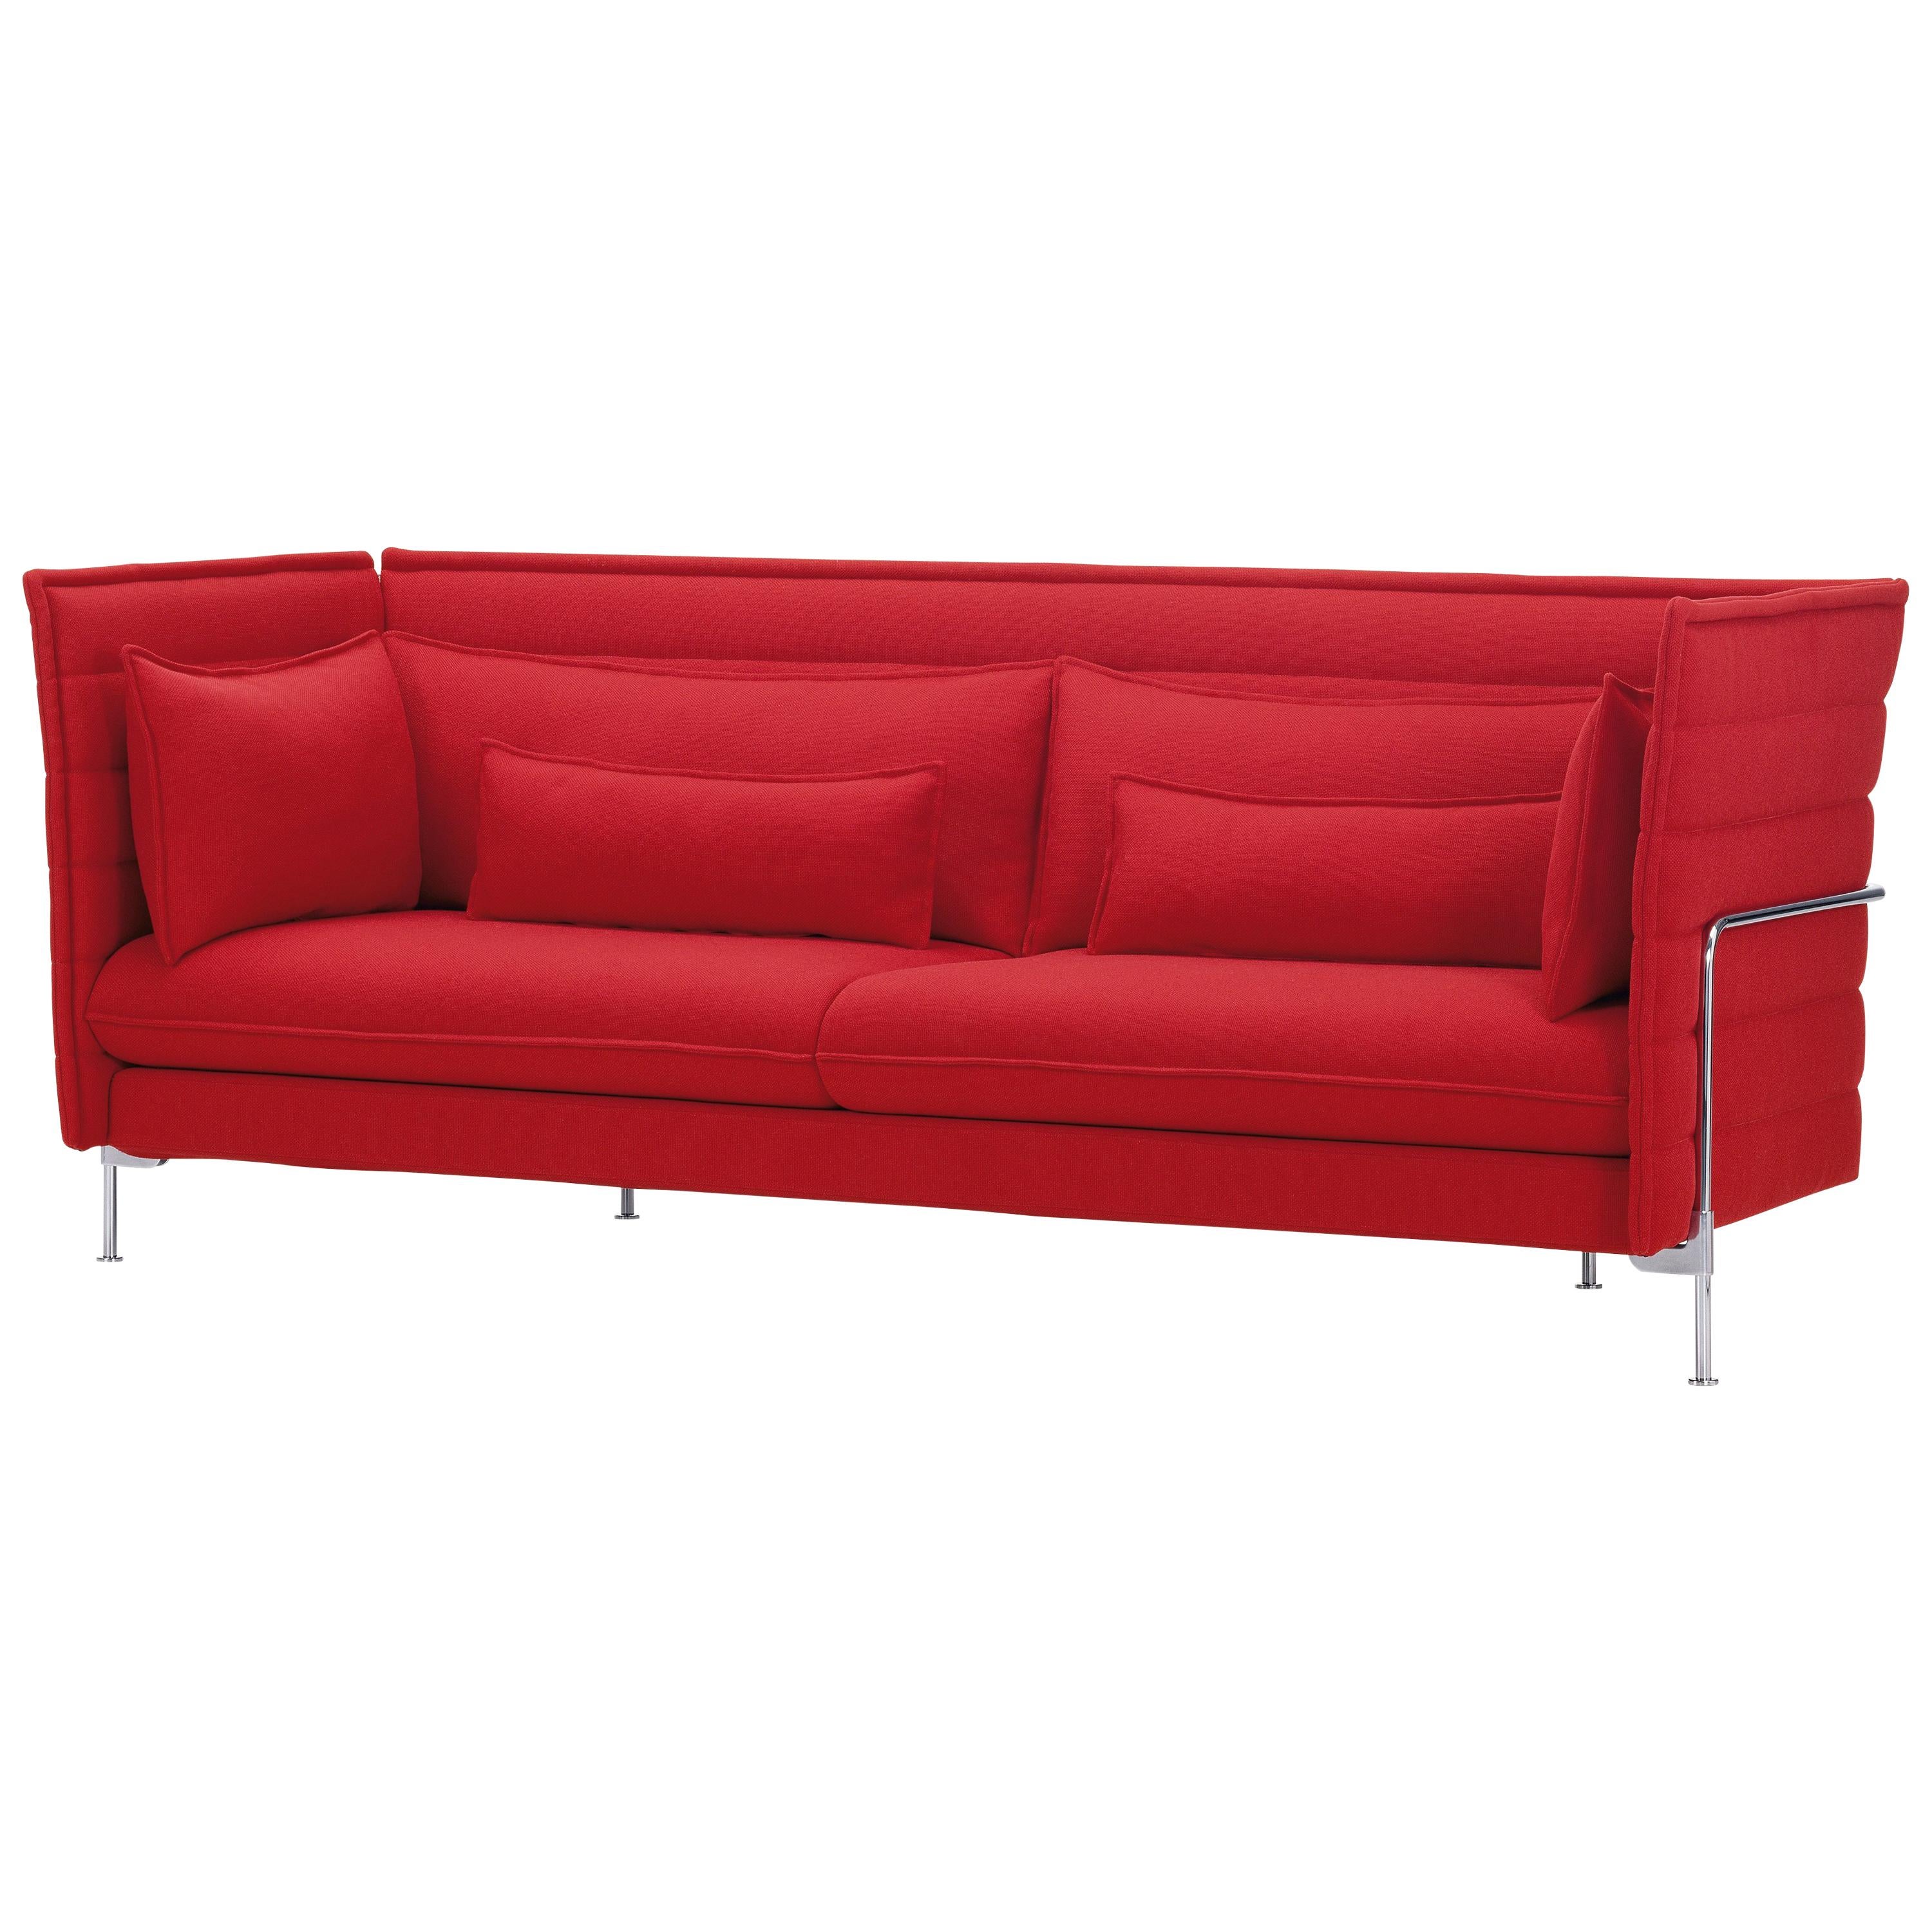 Vitra Alcove 3-Seater Sofa in Red Laser by Ronan & Erwan Bouroullec For Sale